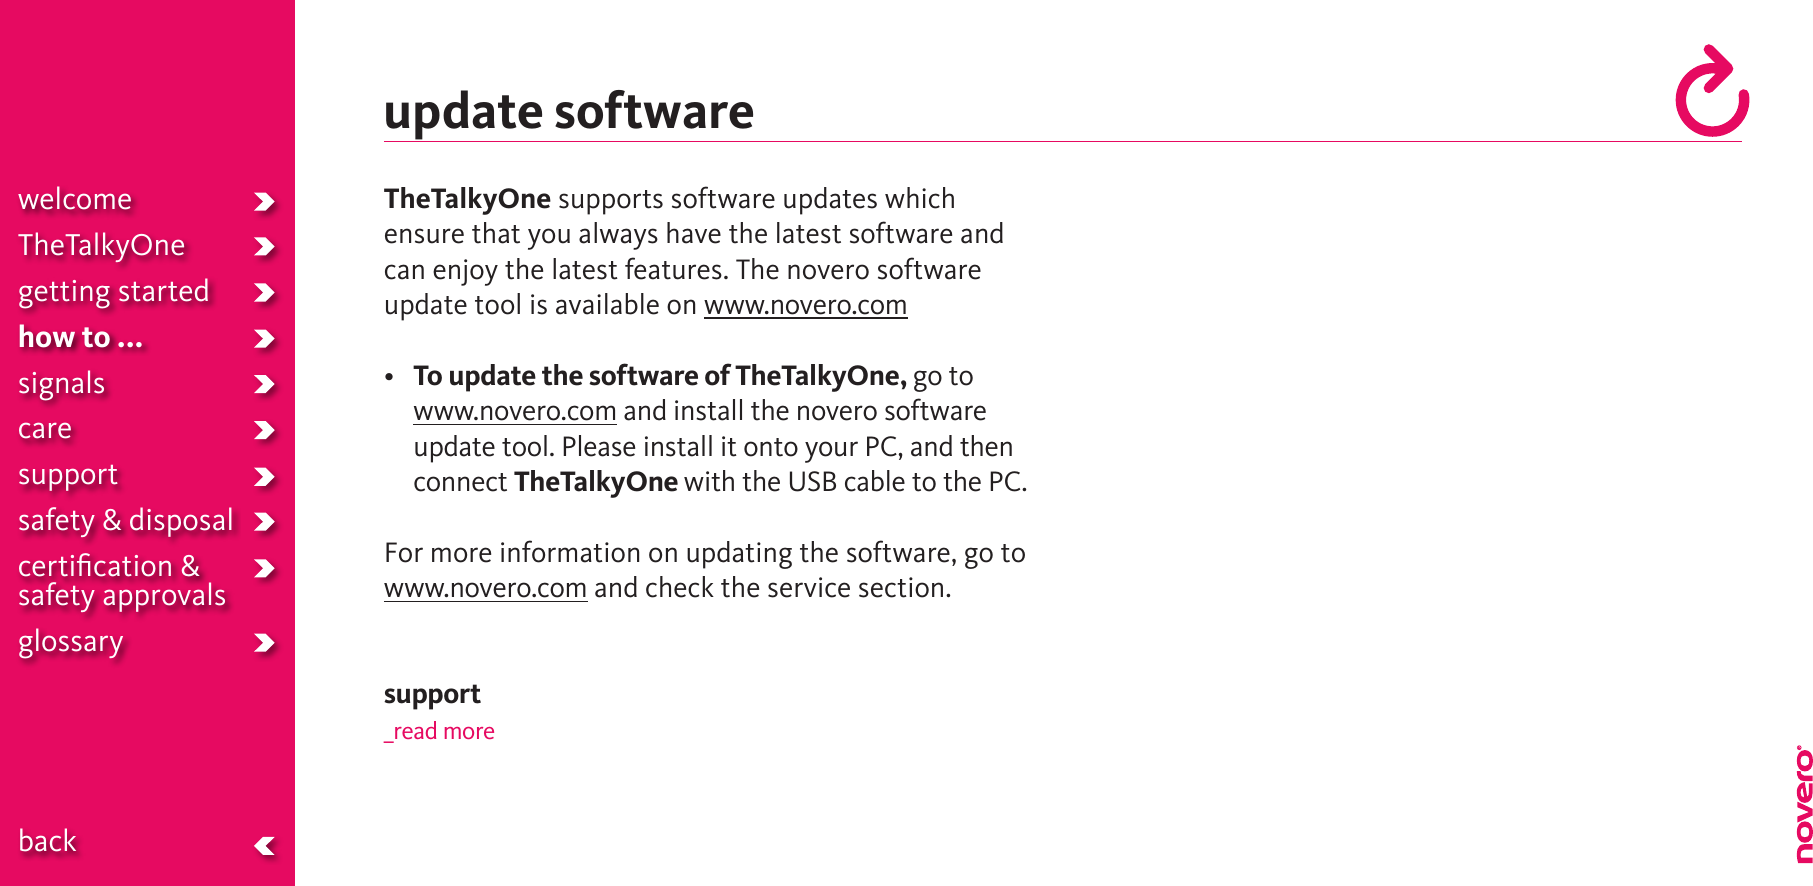 update softwareTheTalkyOne supports software updates which ensure that you always have the latest software and can enjoy the latest features. The novero software update tool is available on www.novero.com• To update the software of TheTalkyOne, go to www.novero.com and install the novero software update tool. Please install it onto your PC, and then connect TheTalkyOne with the USB cable to the PC.For more information on updating the software, go to  www.novero.com and check the service section.support_read morewelcomeTheTalkyOnegetting startedhow to ...signalscaresupportsafety &amp; disposalcertiﬁcation &amp;  safety approvals glossary  back